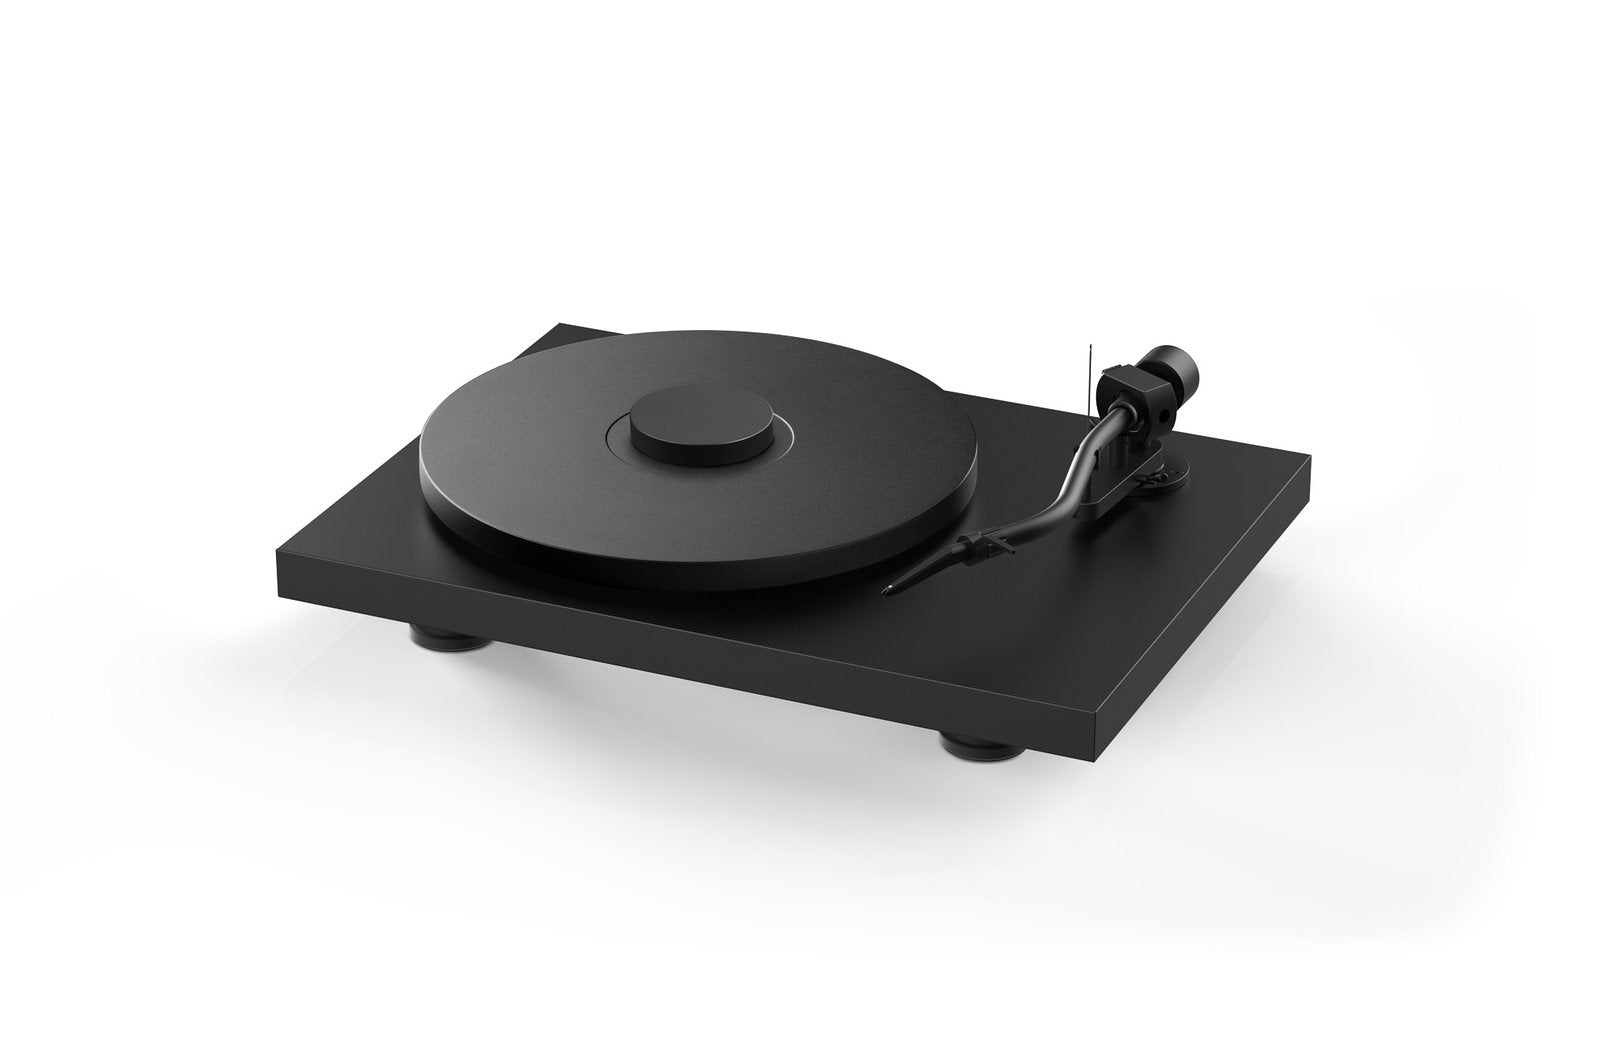 Pro-Ject Debut PRO S turntable